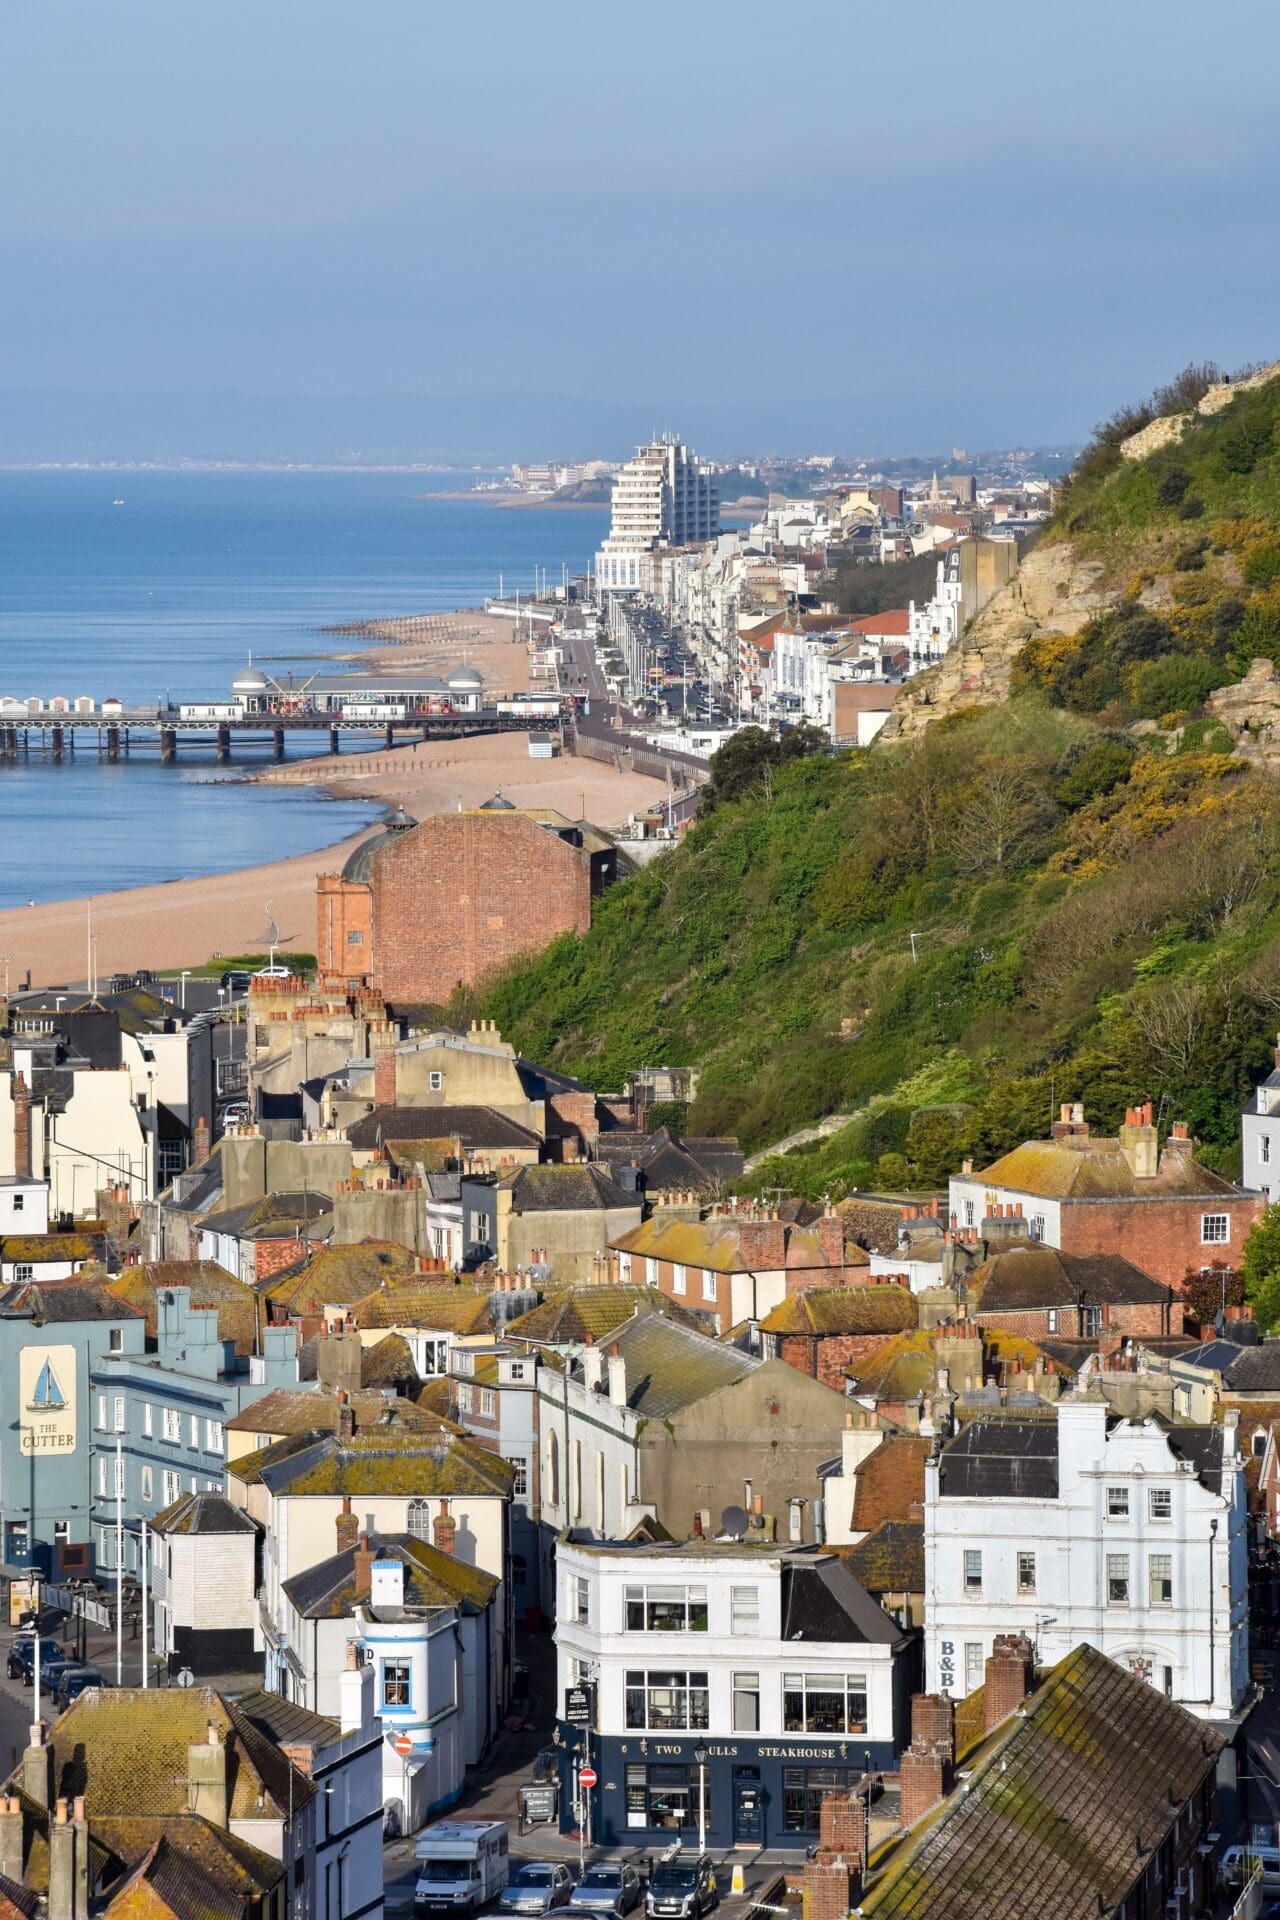 A weekend in Hastings | A view over the rooftops and hillside of Hastings, with the pier and beach to the left